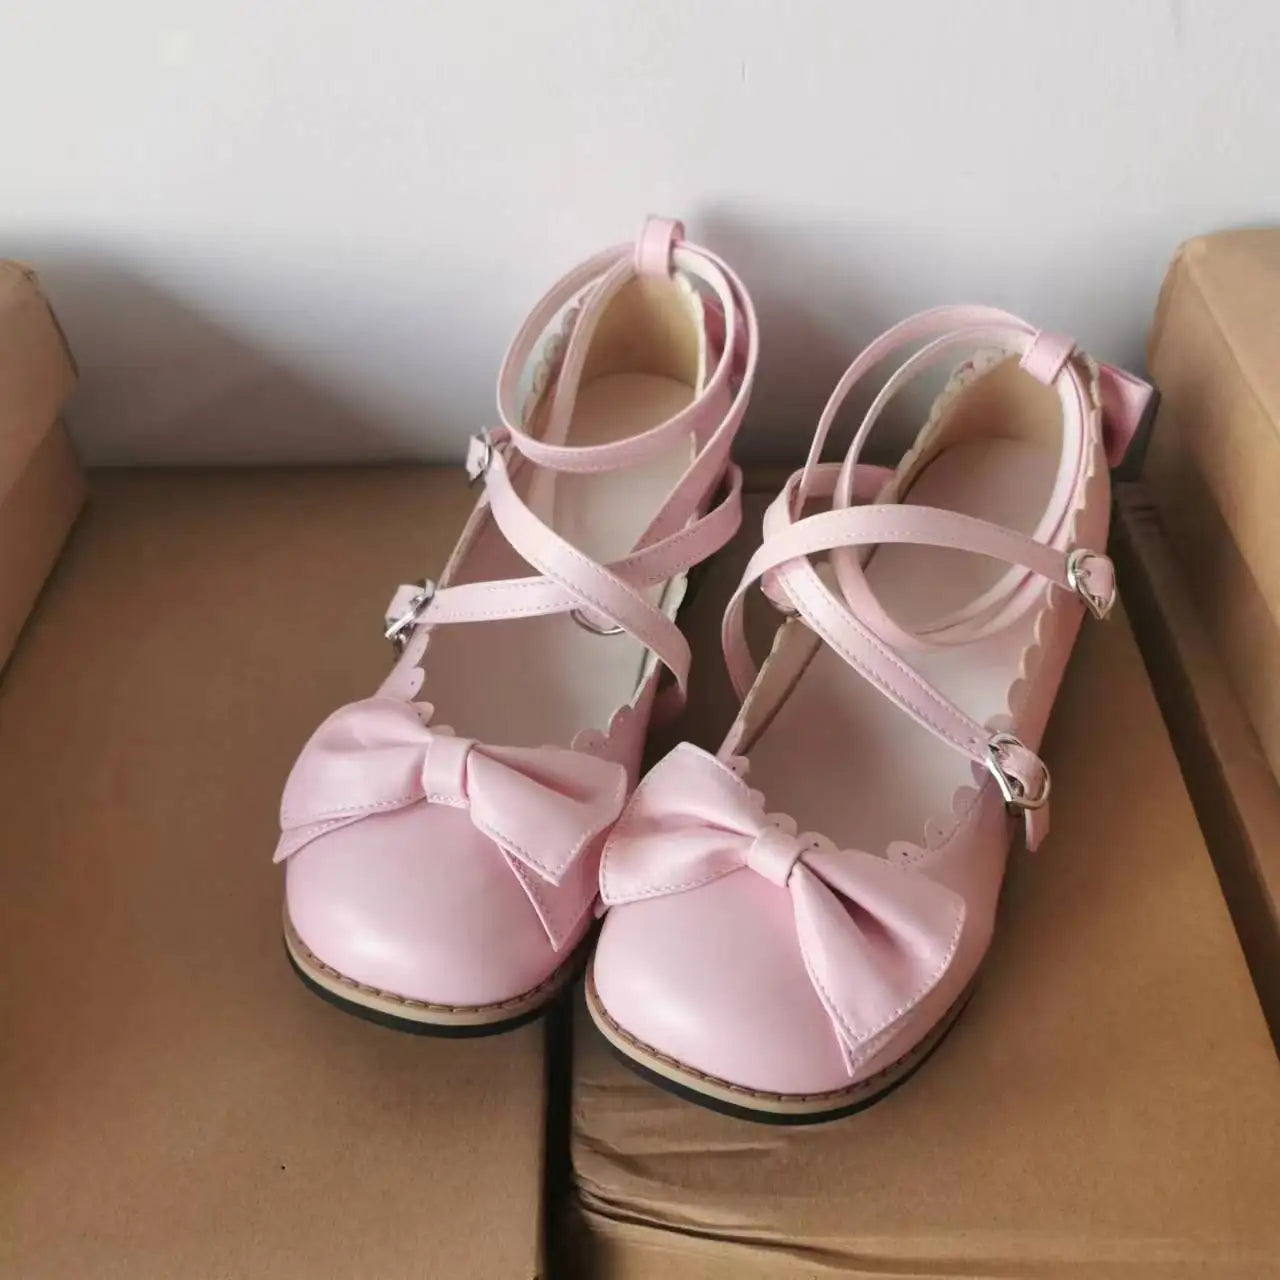 Cute Cross-Strap Flats - Princess Party Shoes - Pink / 36 - Accessories - Shoes - 8 - 2024